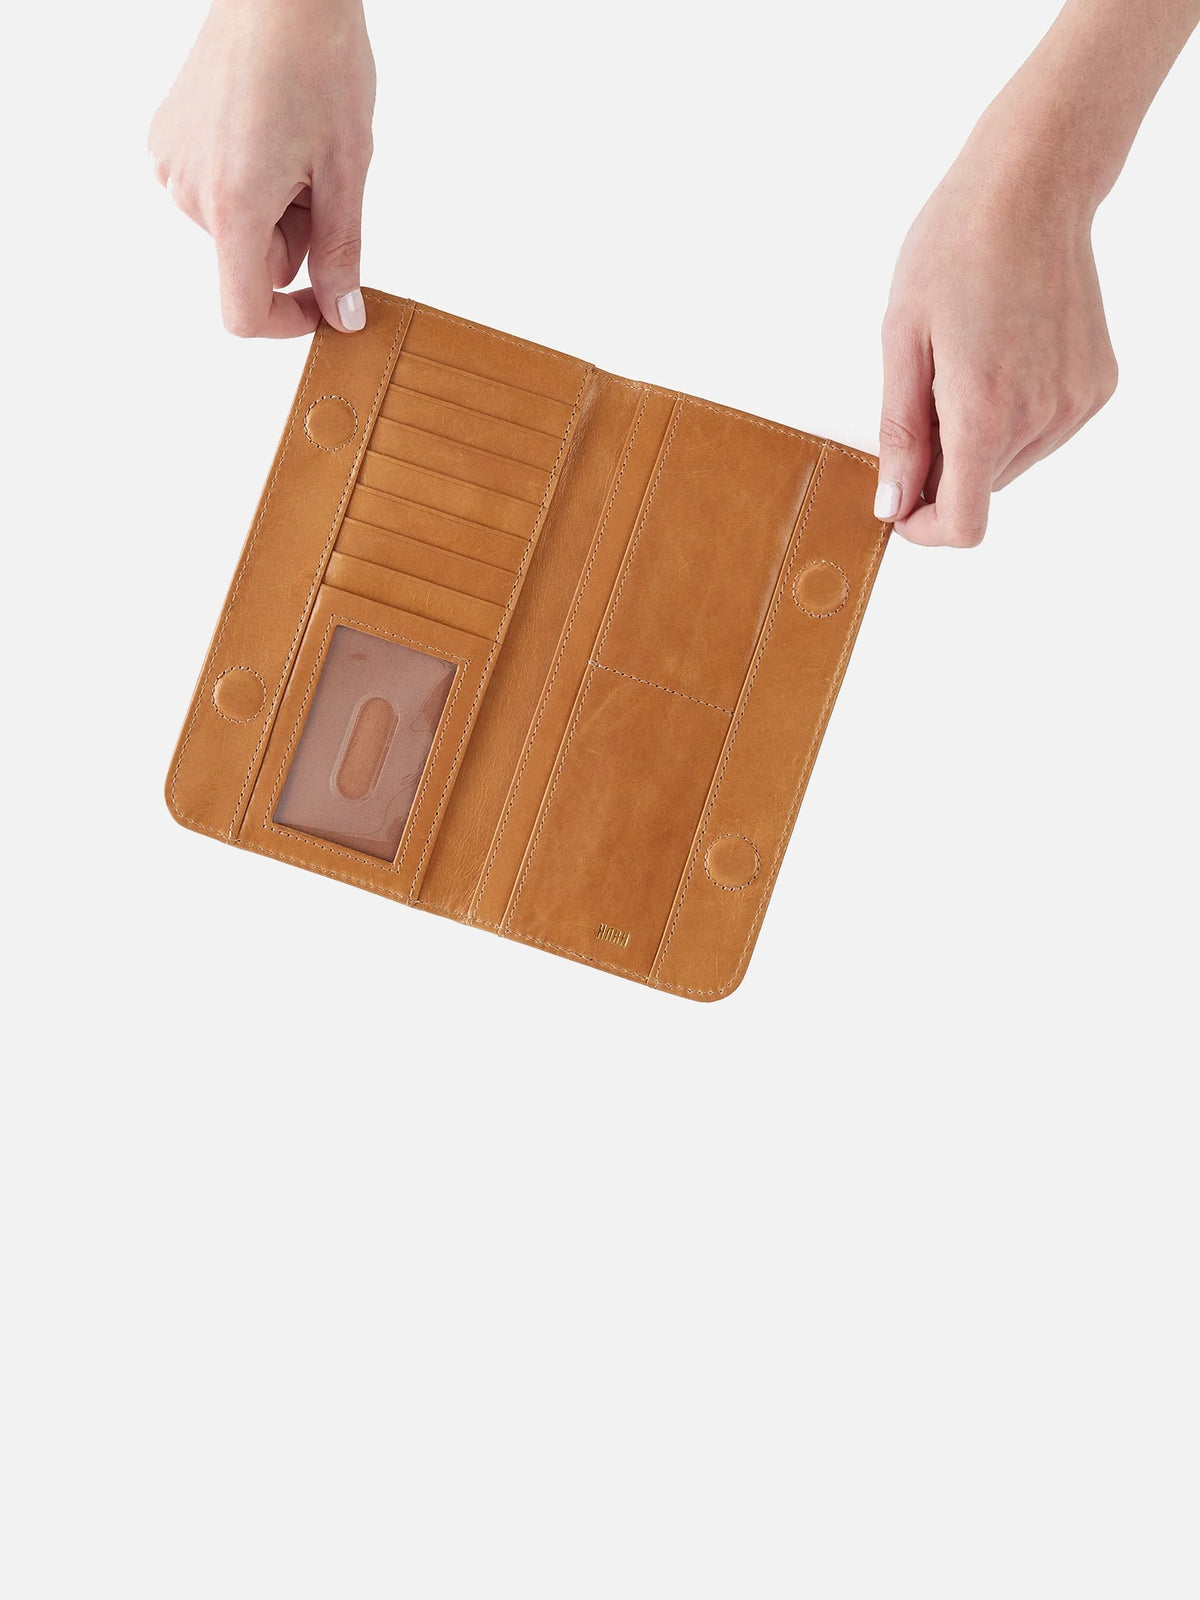 hobo angle continental wallet in natural polished leather